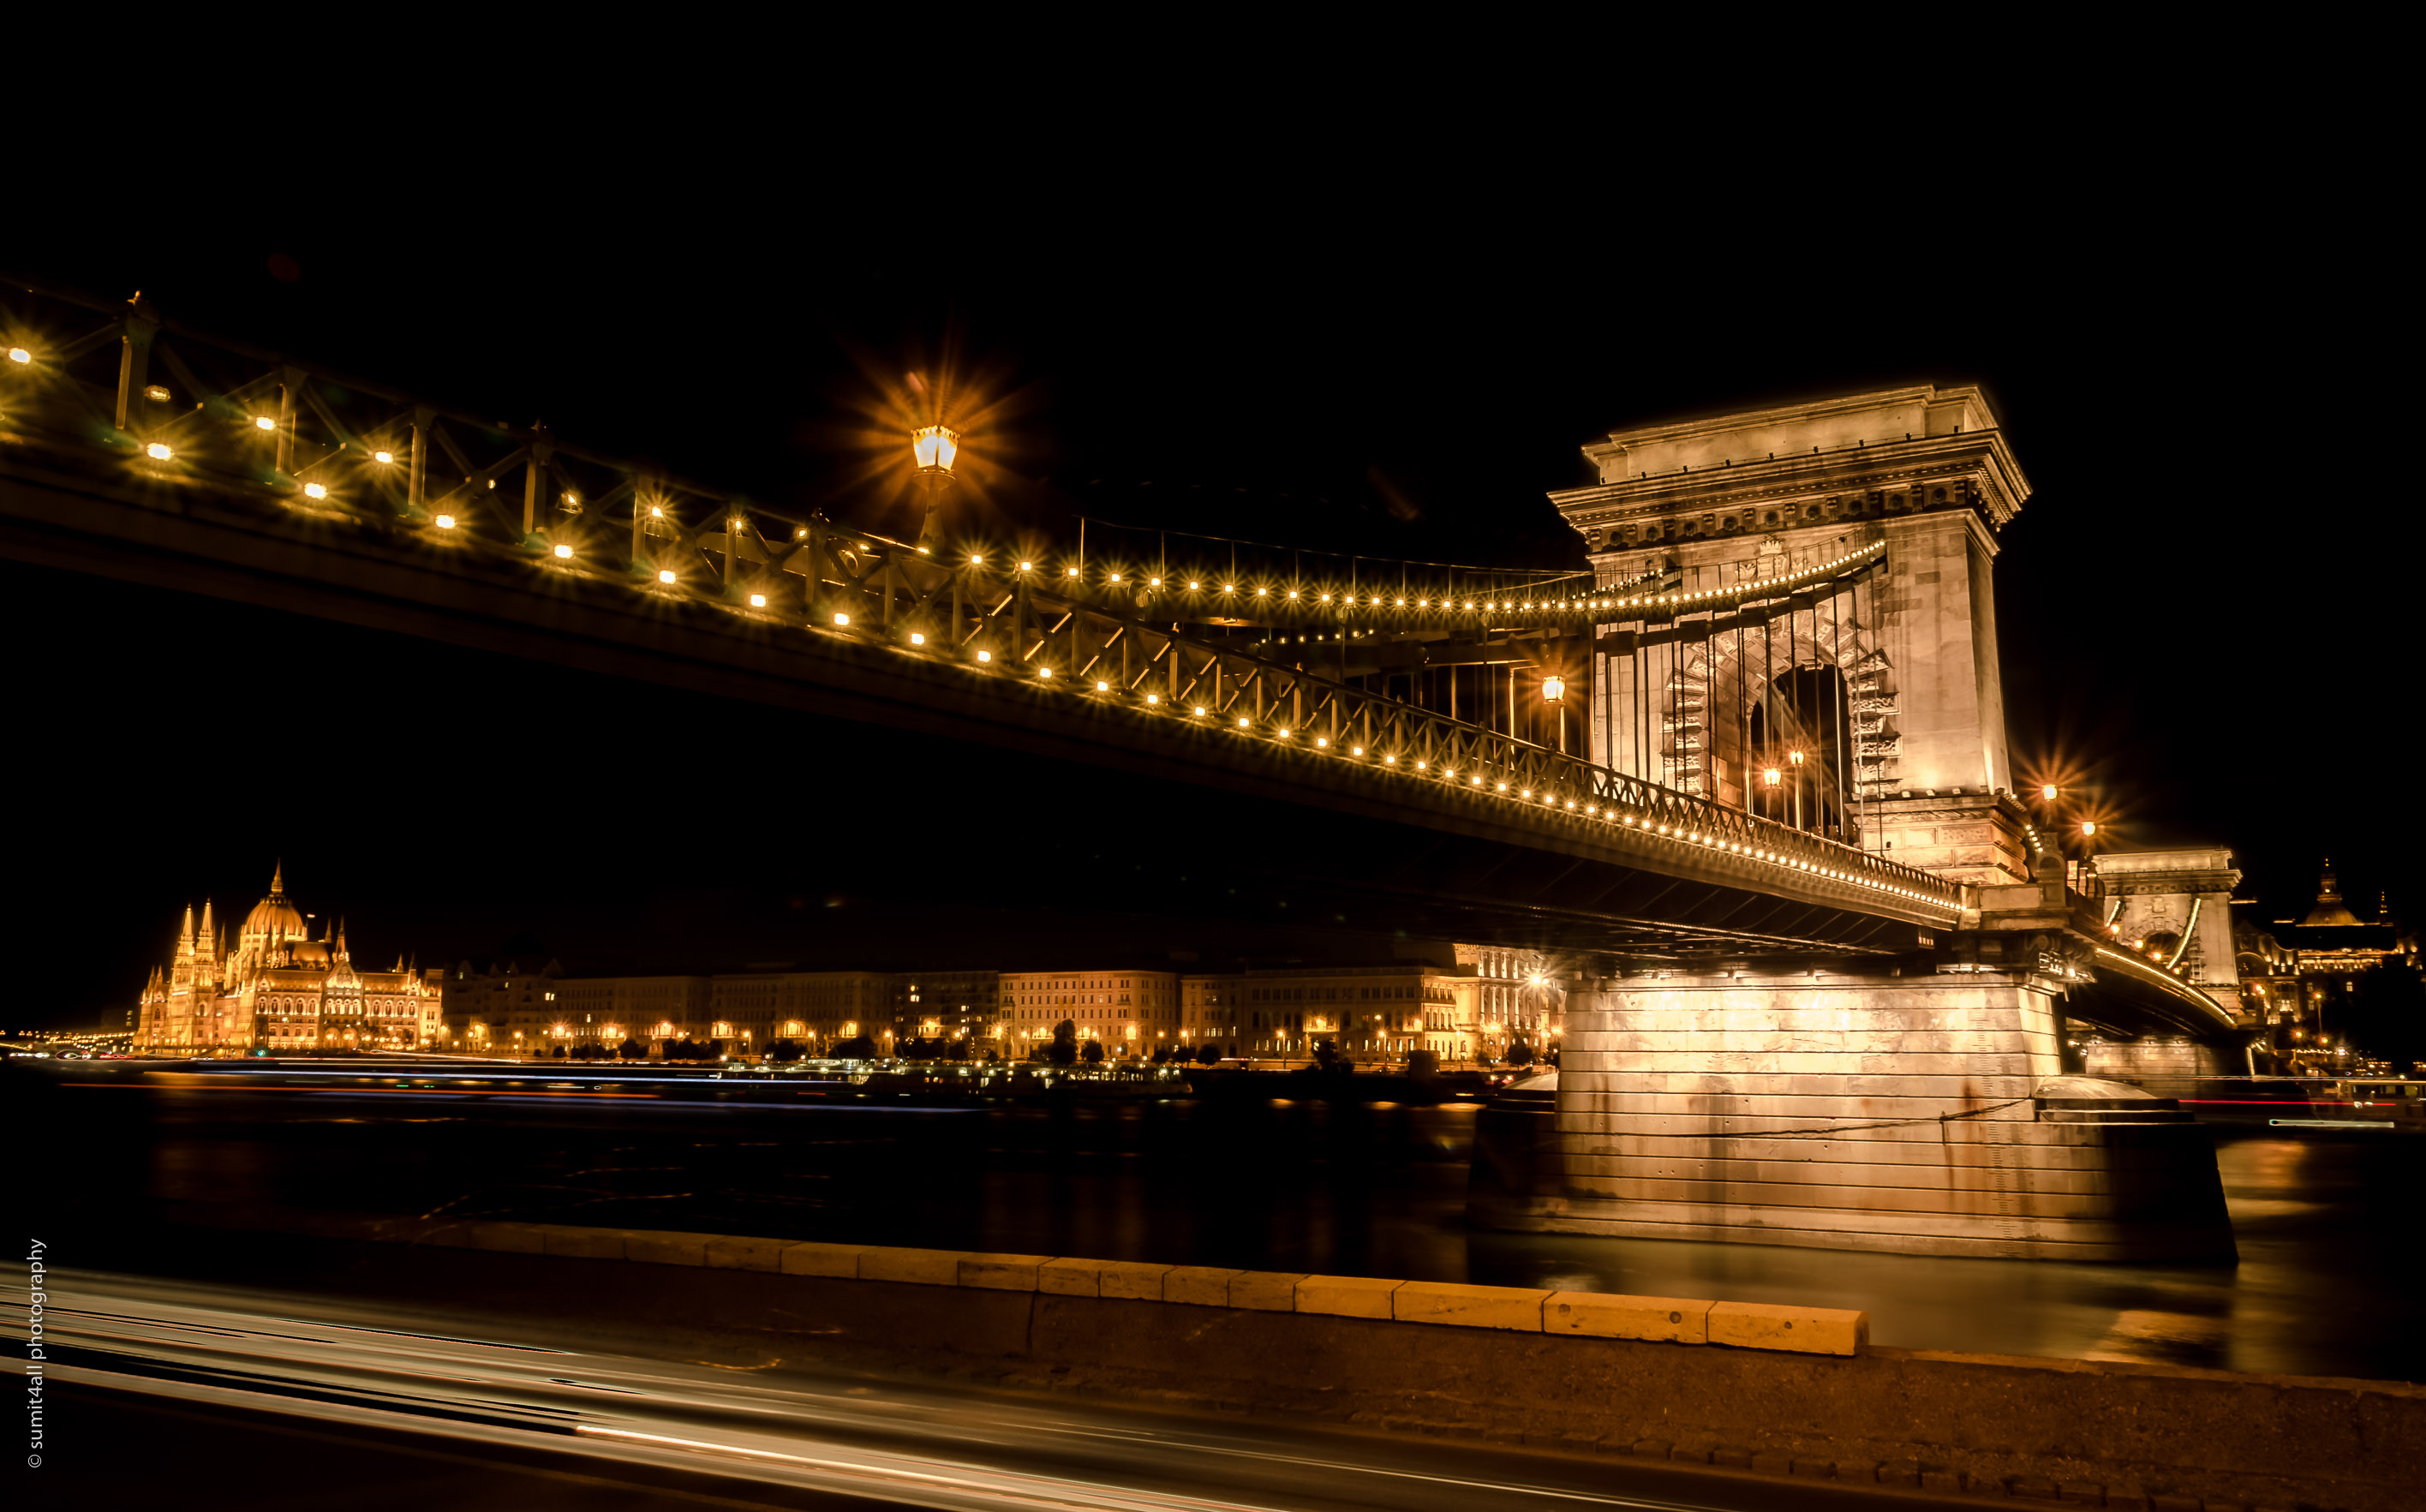 The Chain Bridge in Budapest with the Hungarian Parliament seen in the background